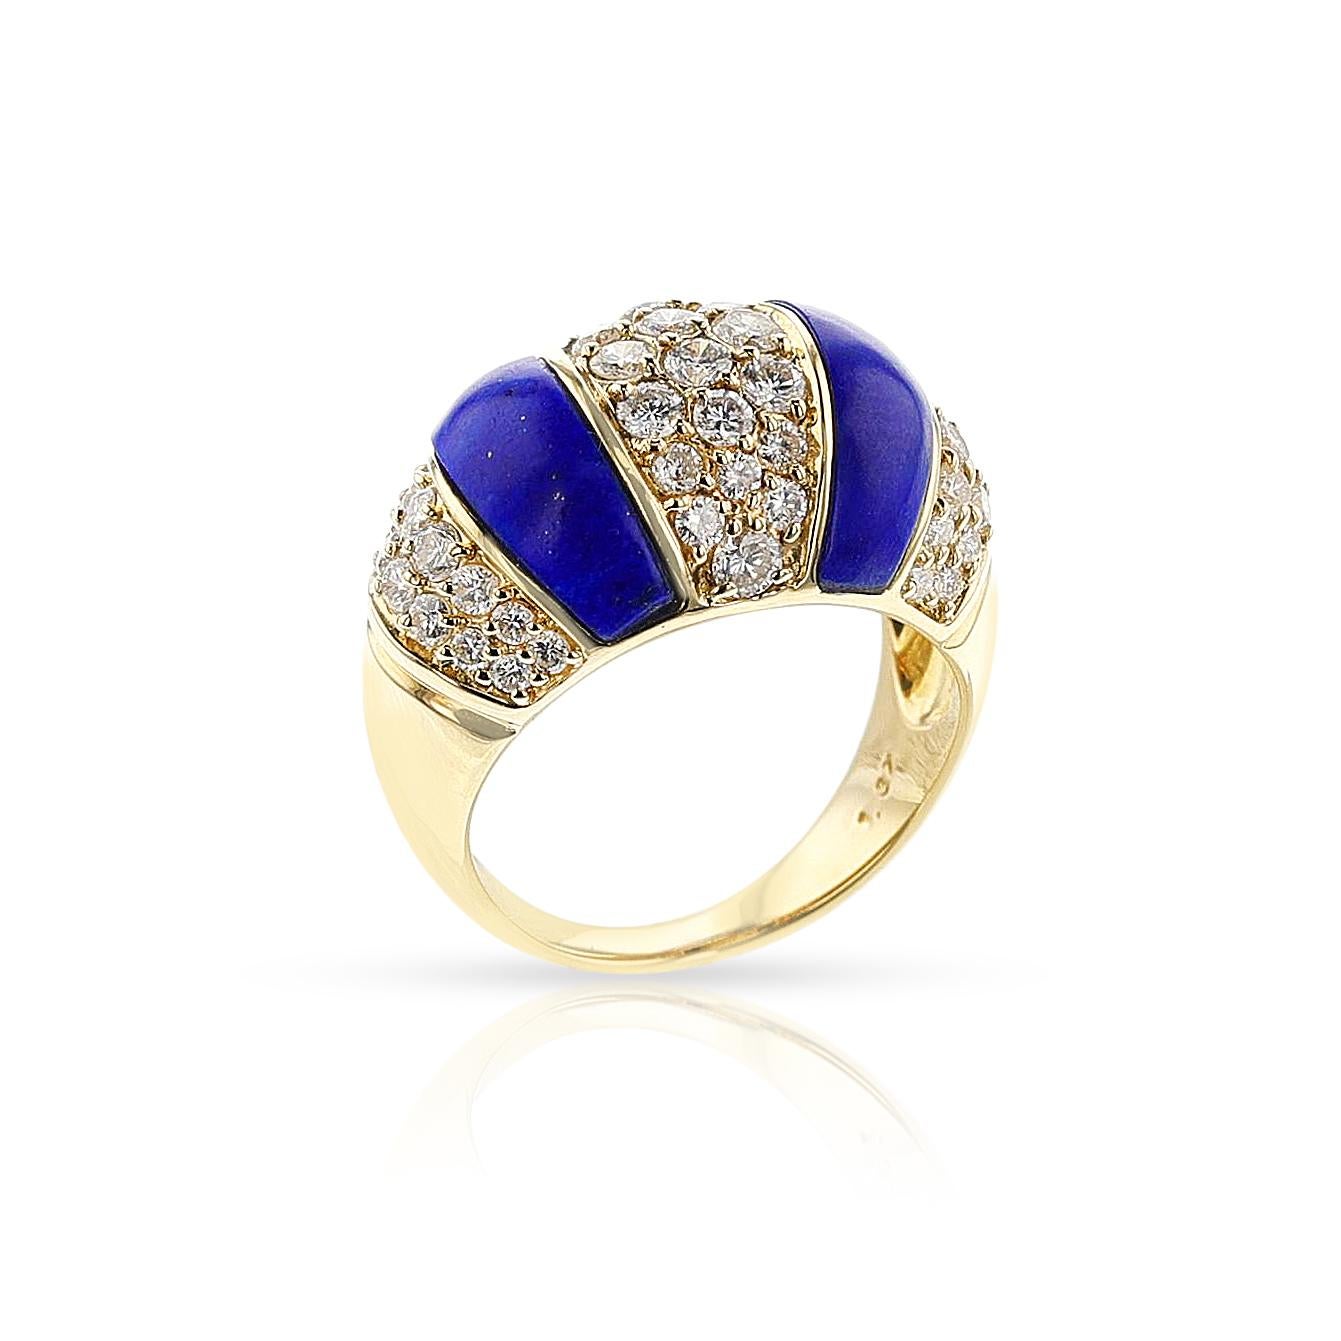 Crafted from 18k gold, this Lapis and Diamond Bombe Ring boasts a total weight of 7.80 grams and features dazzling diamonds weighing 1.37 cts. Ring size US 6.50. It is a stunning addition to any jewelry collection, perfect for those seeking elegance